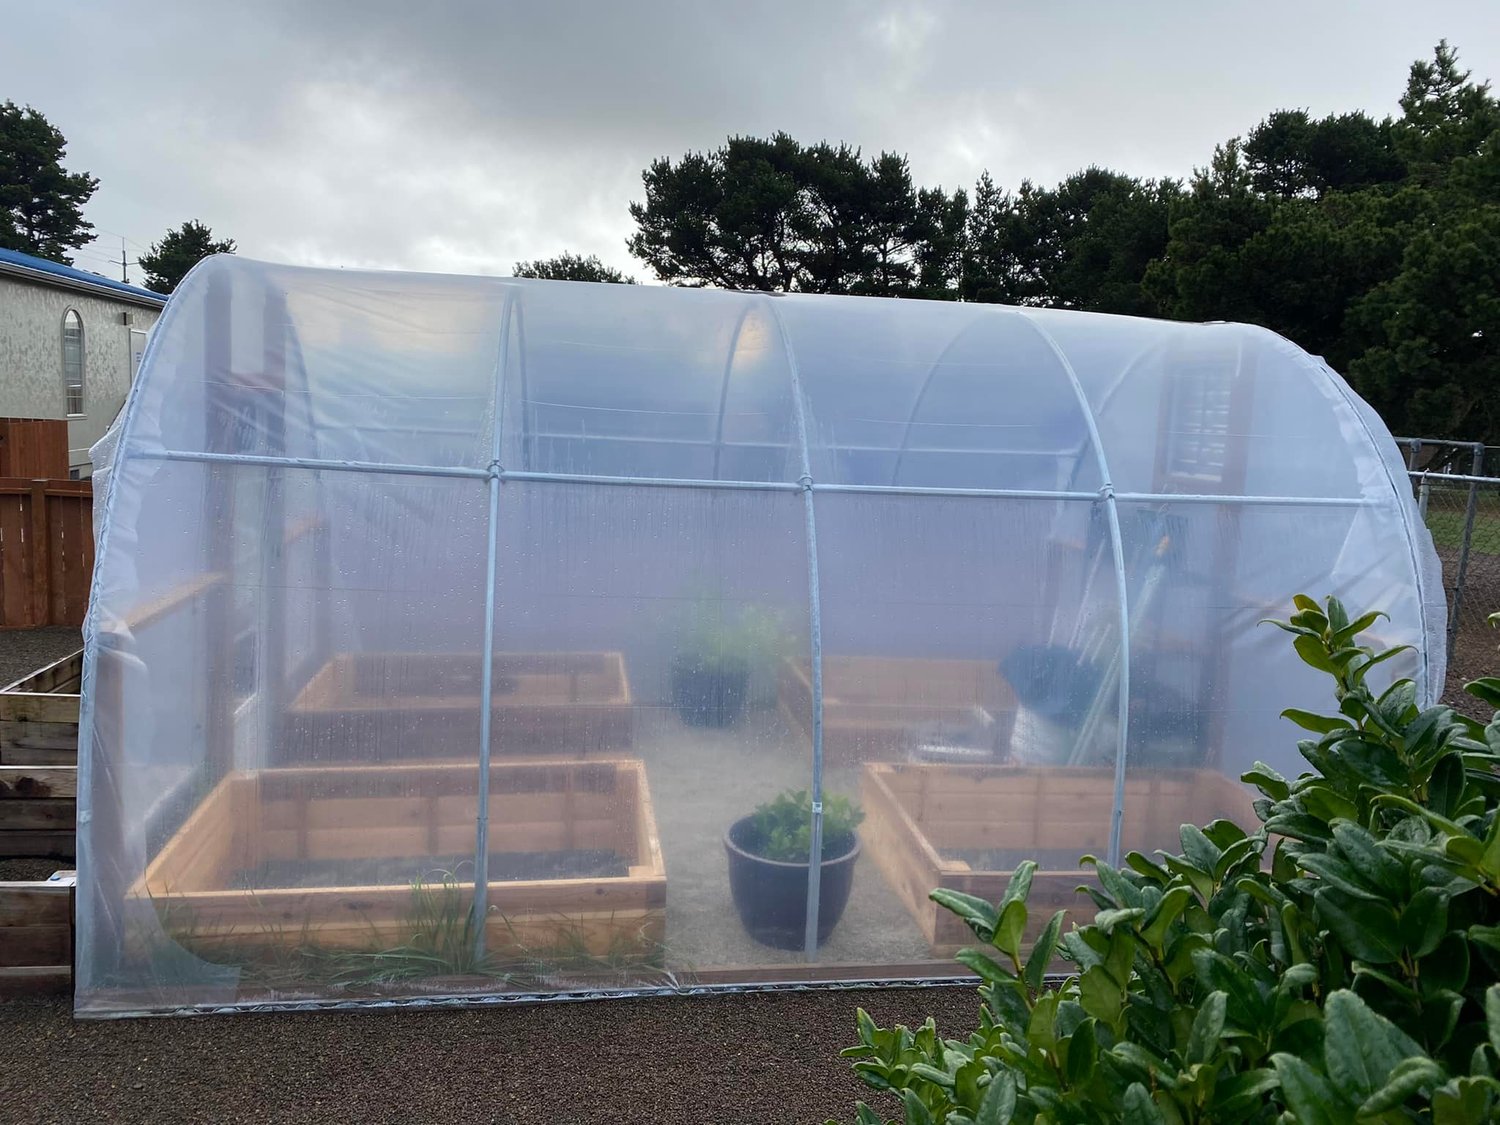 Greenhouse Kits for Sale: DIY Greenhouses - Materials ...